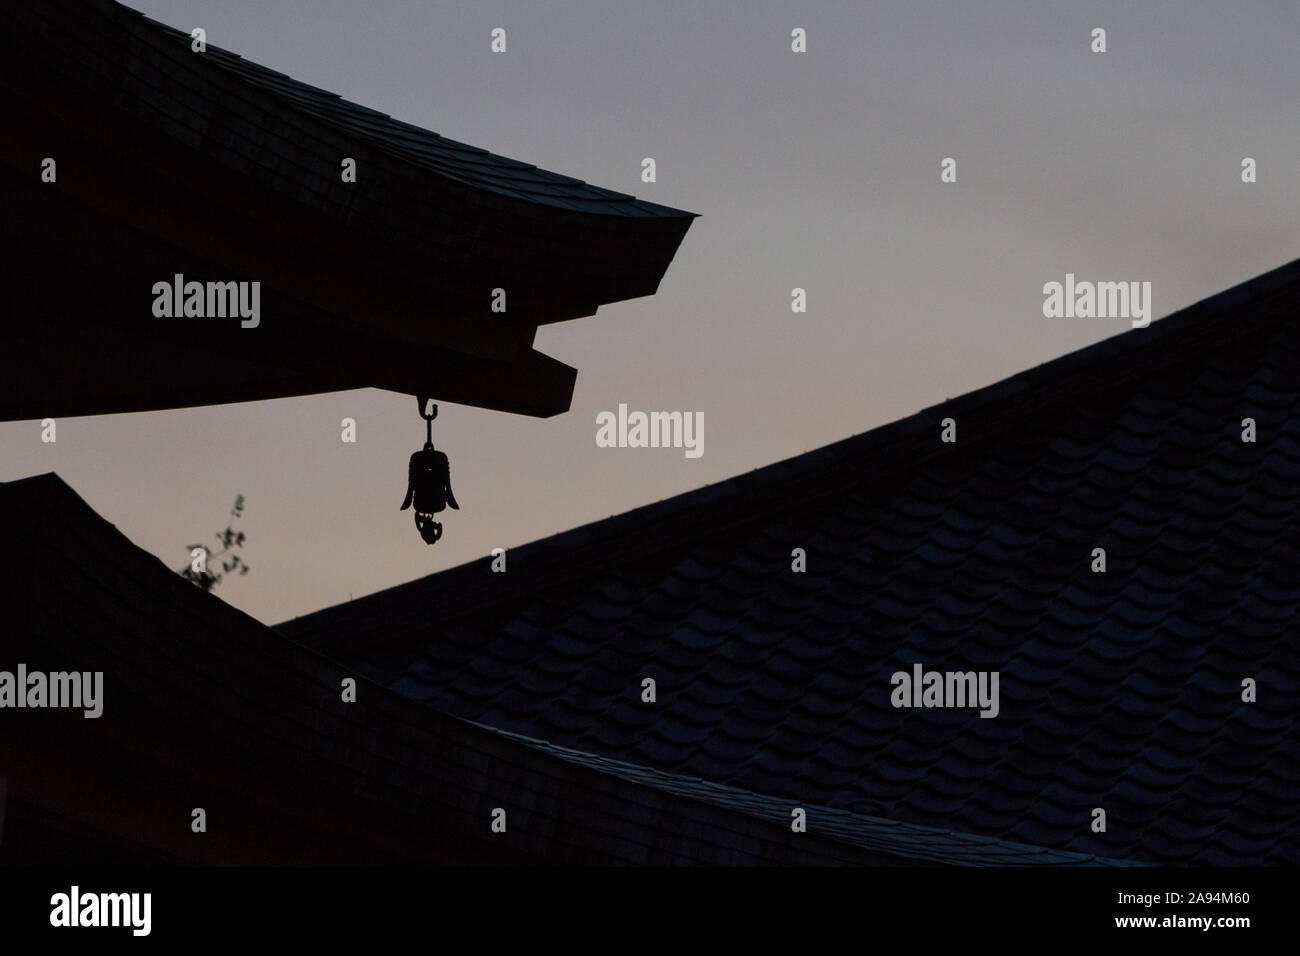 Abstract silhouette image of a shrine's roof in Shin-Otsuka, Tokyo, Japan. Stock Photo